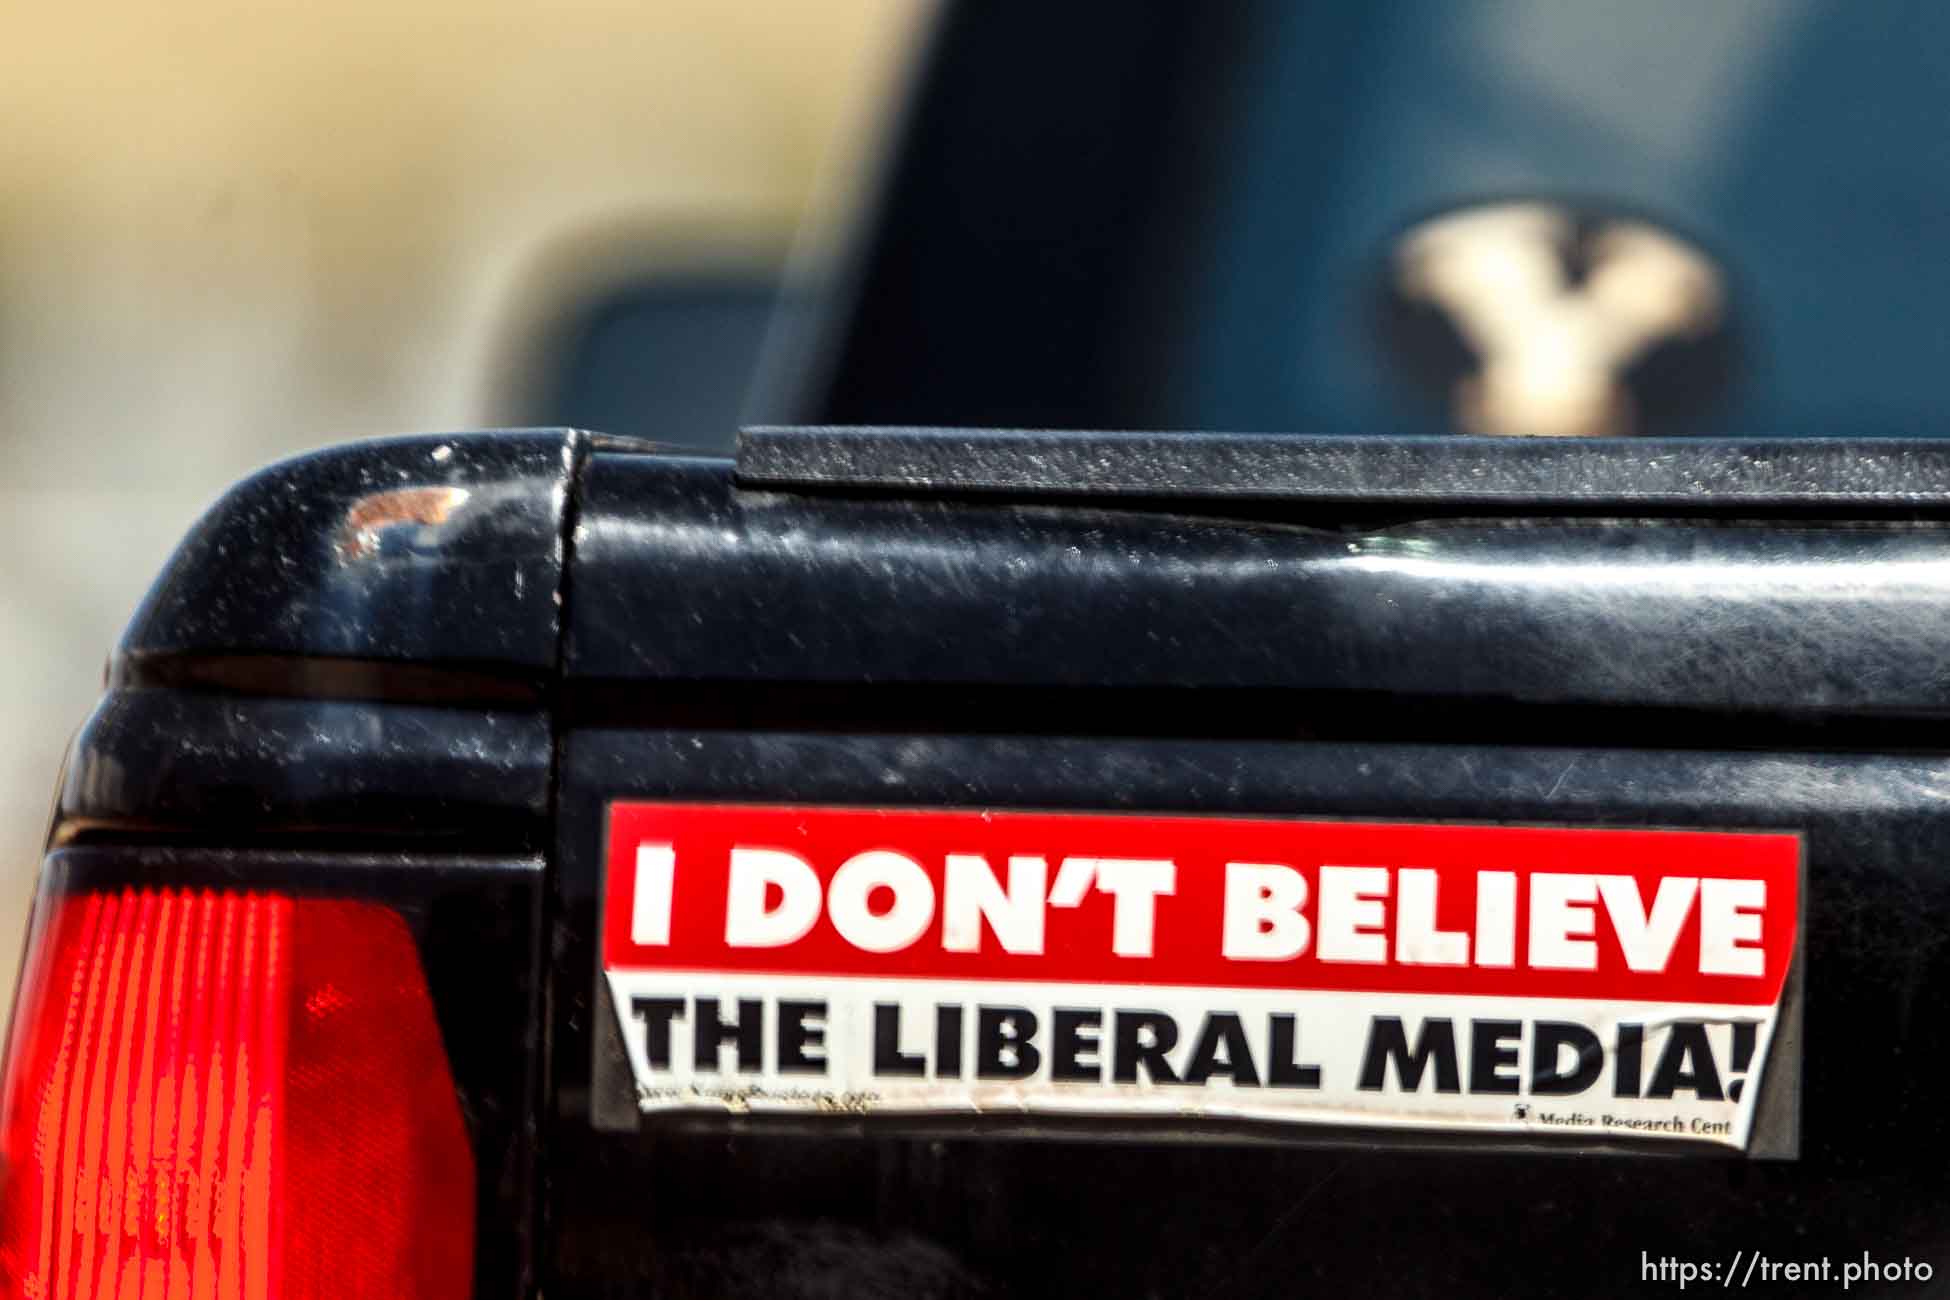 I don’t believe the liberal media